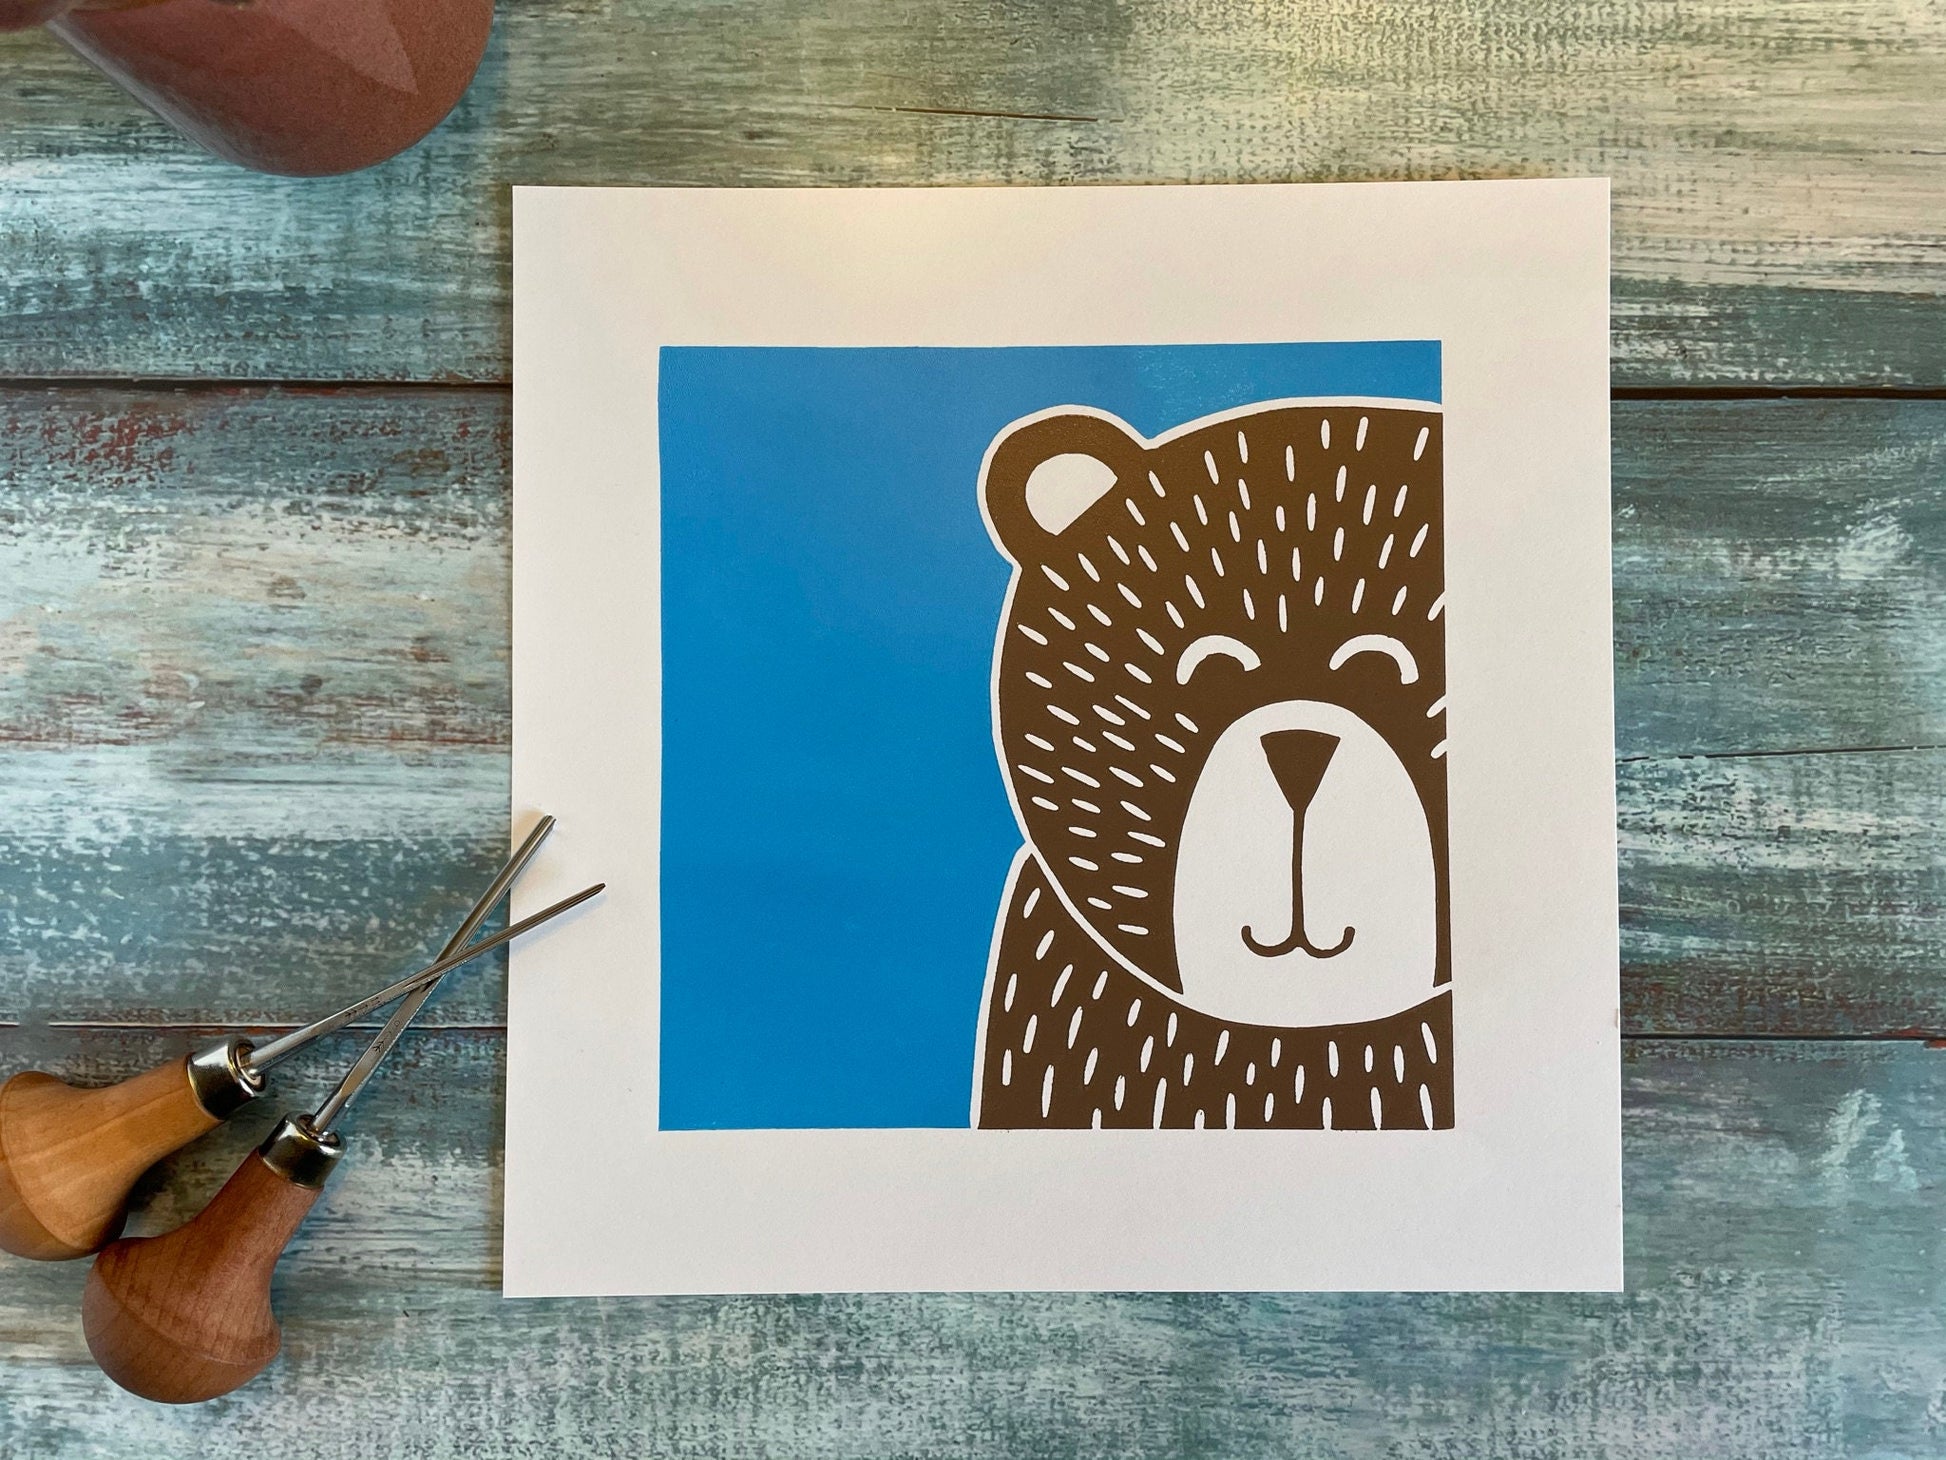 A multiblock lino print of a bear with a blue background